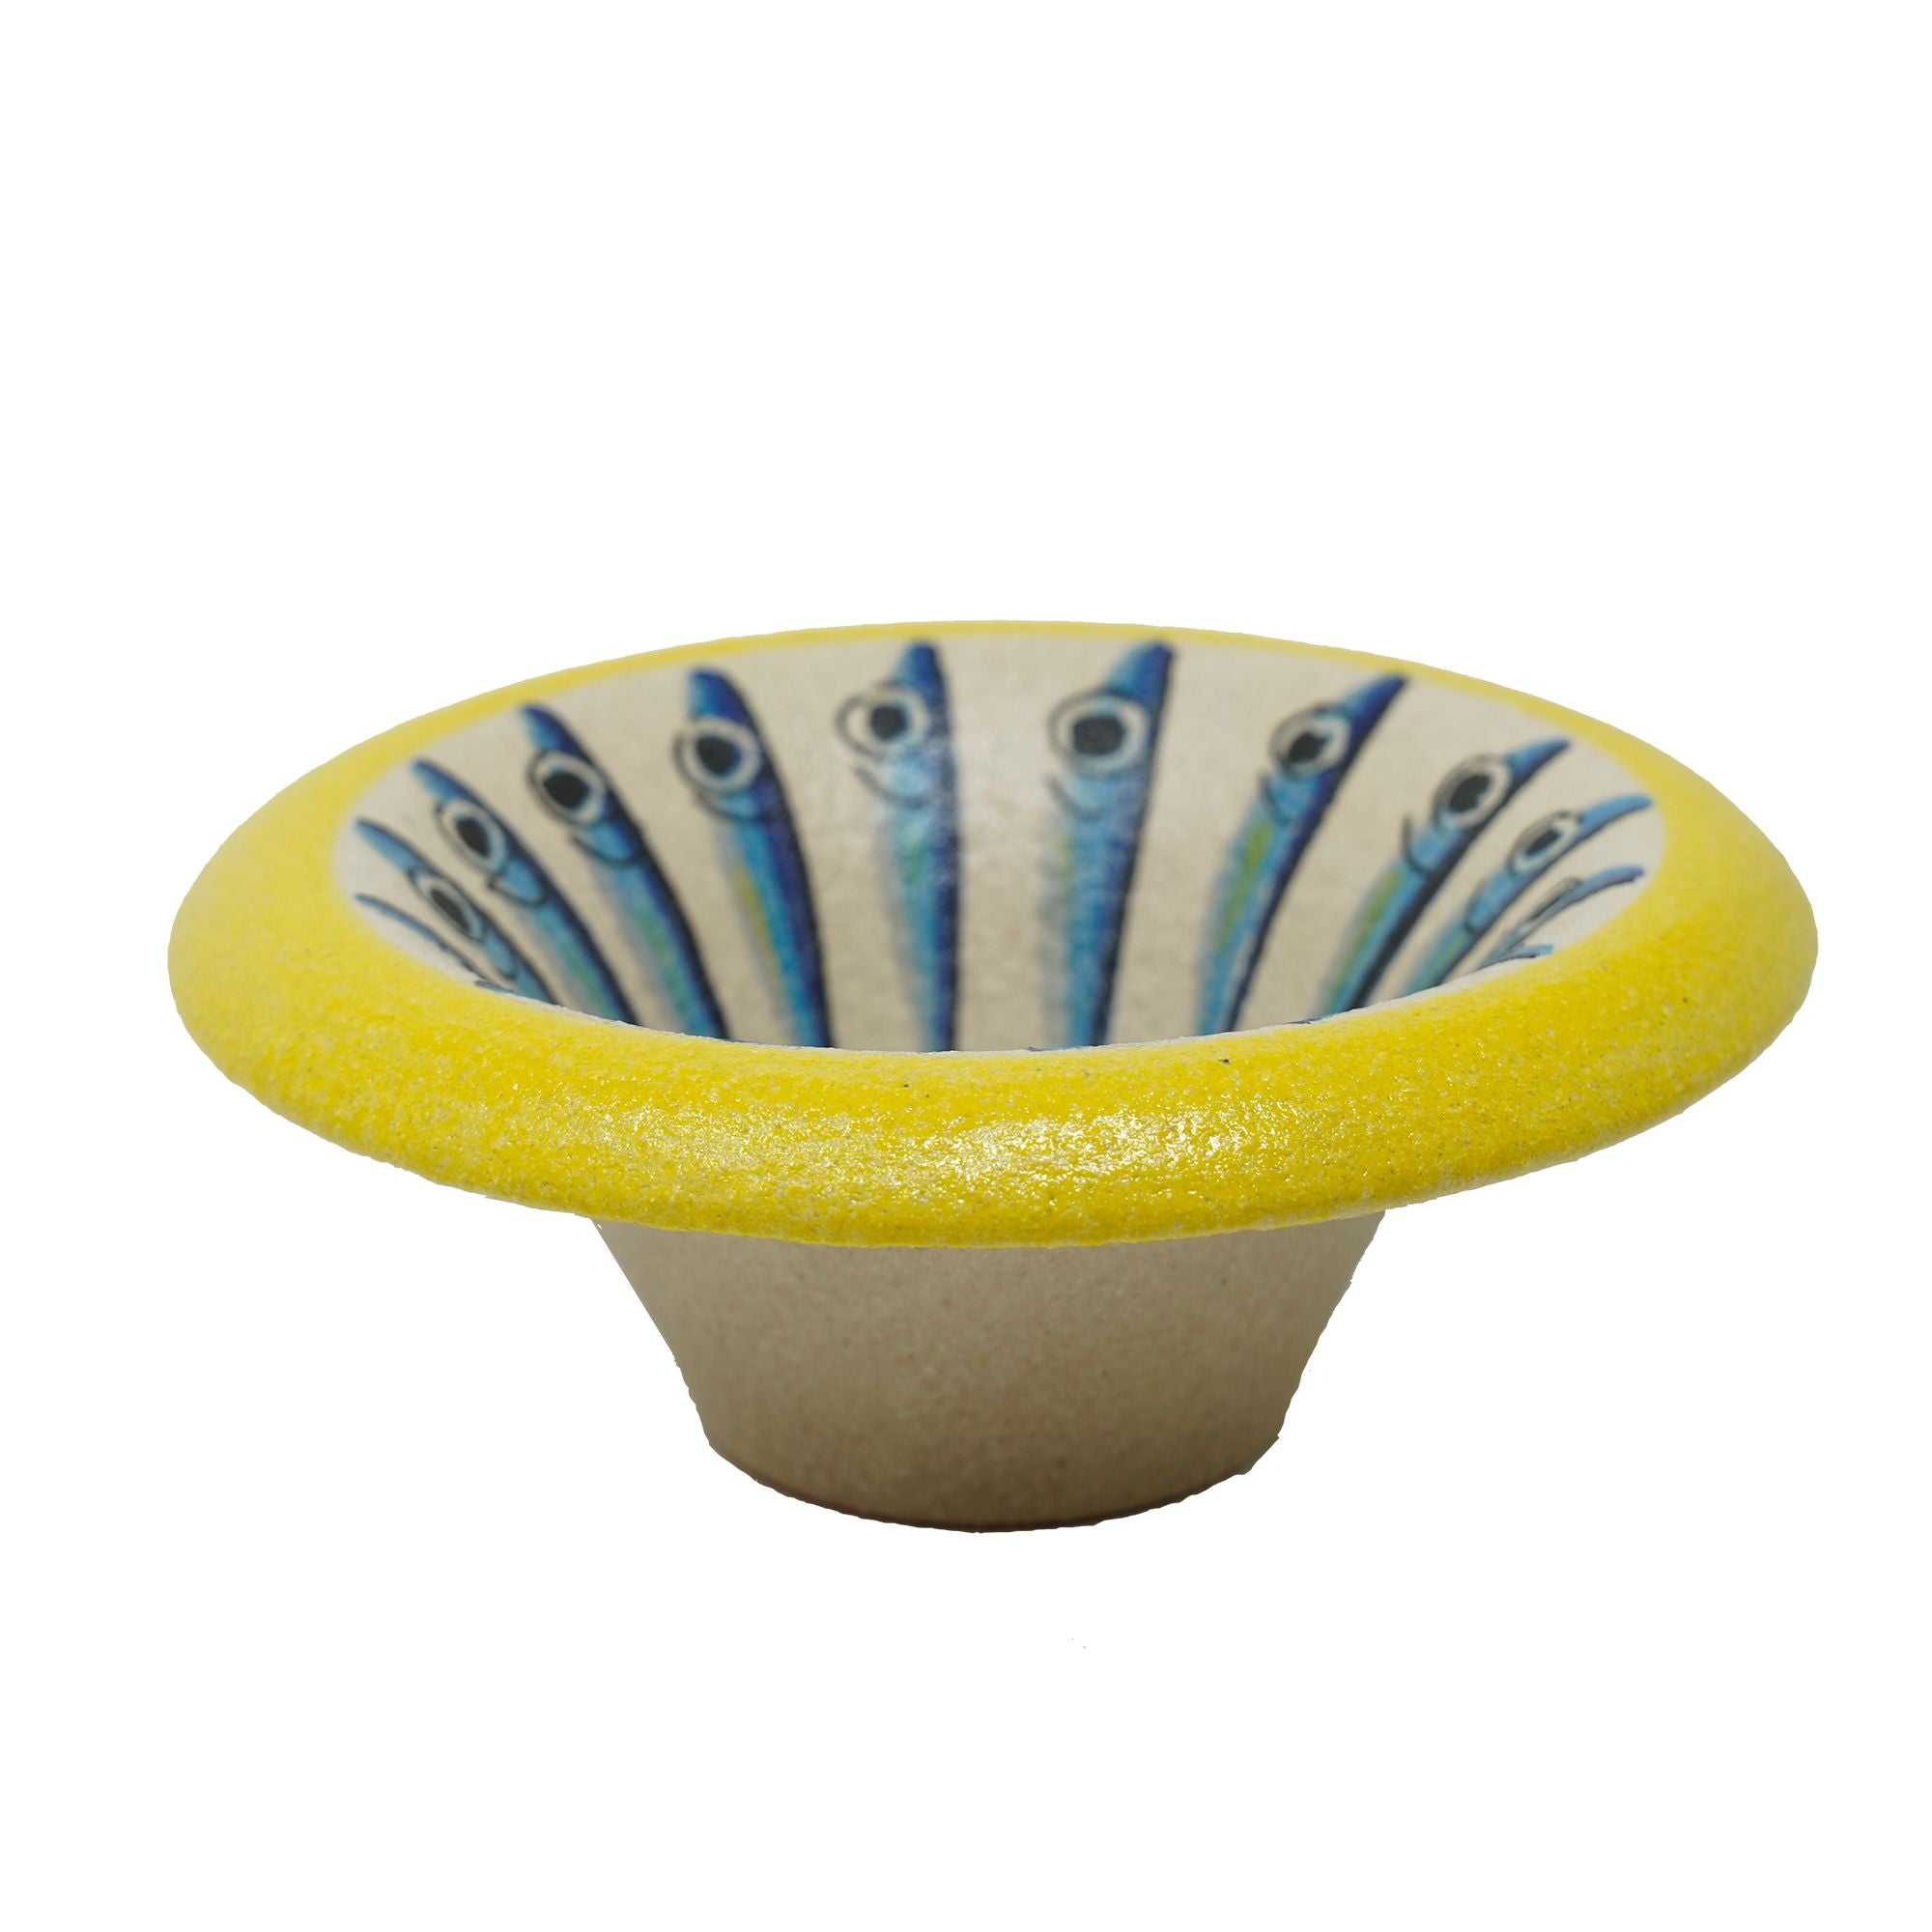 Small Anchovy Bowl by Pierfrancesco Solimene